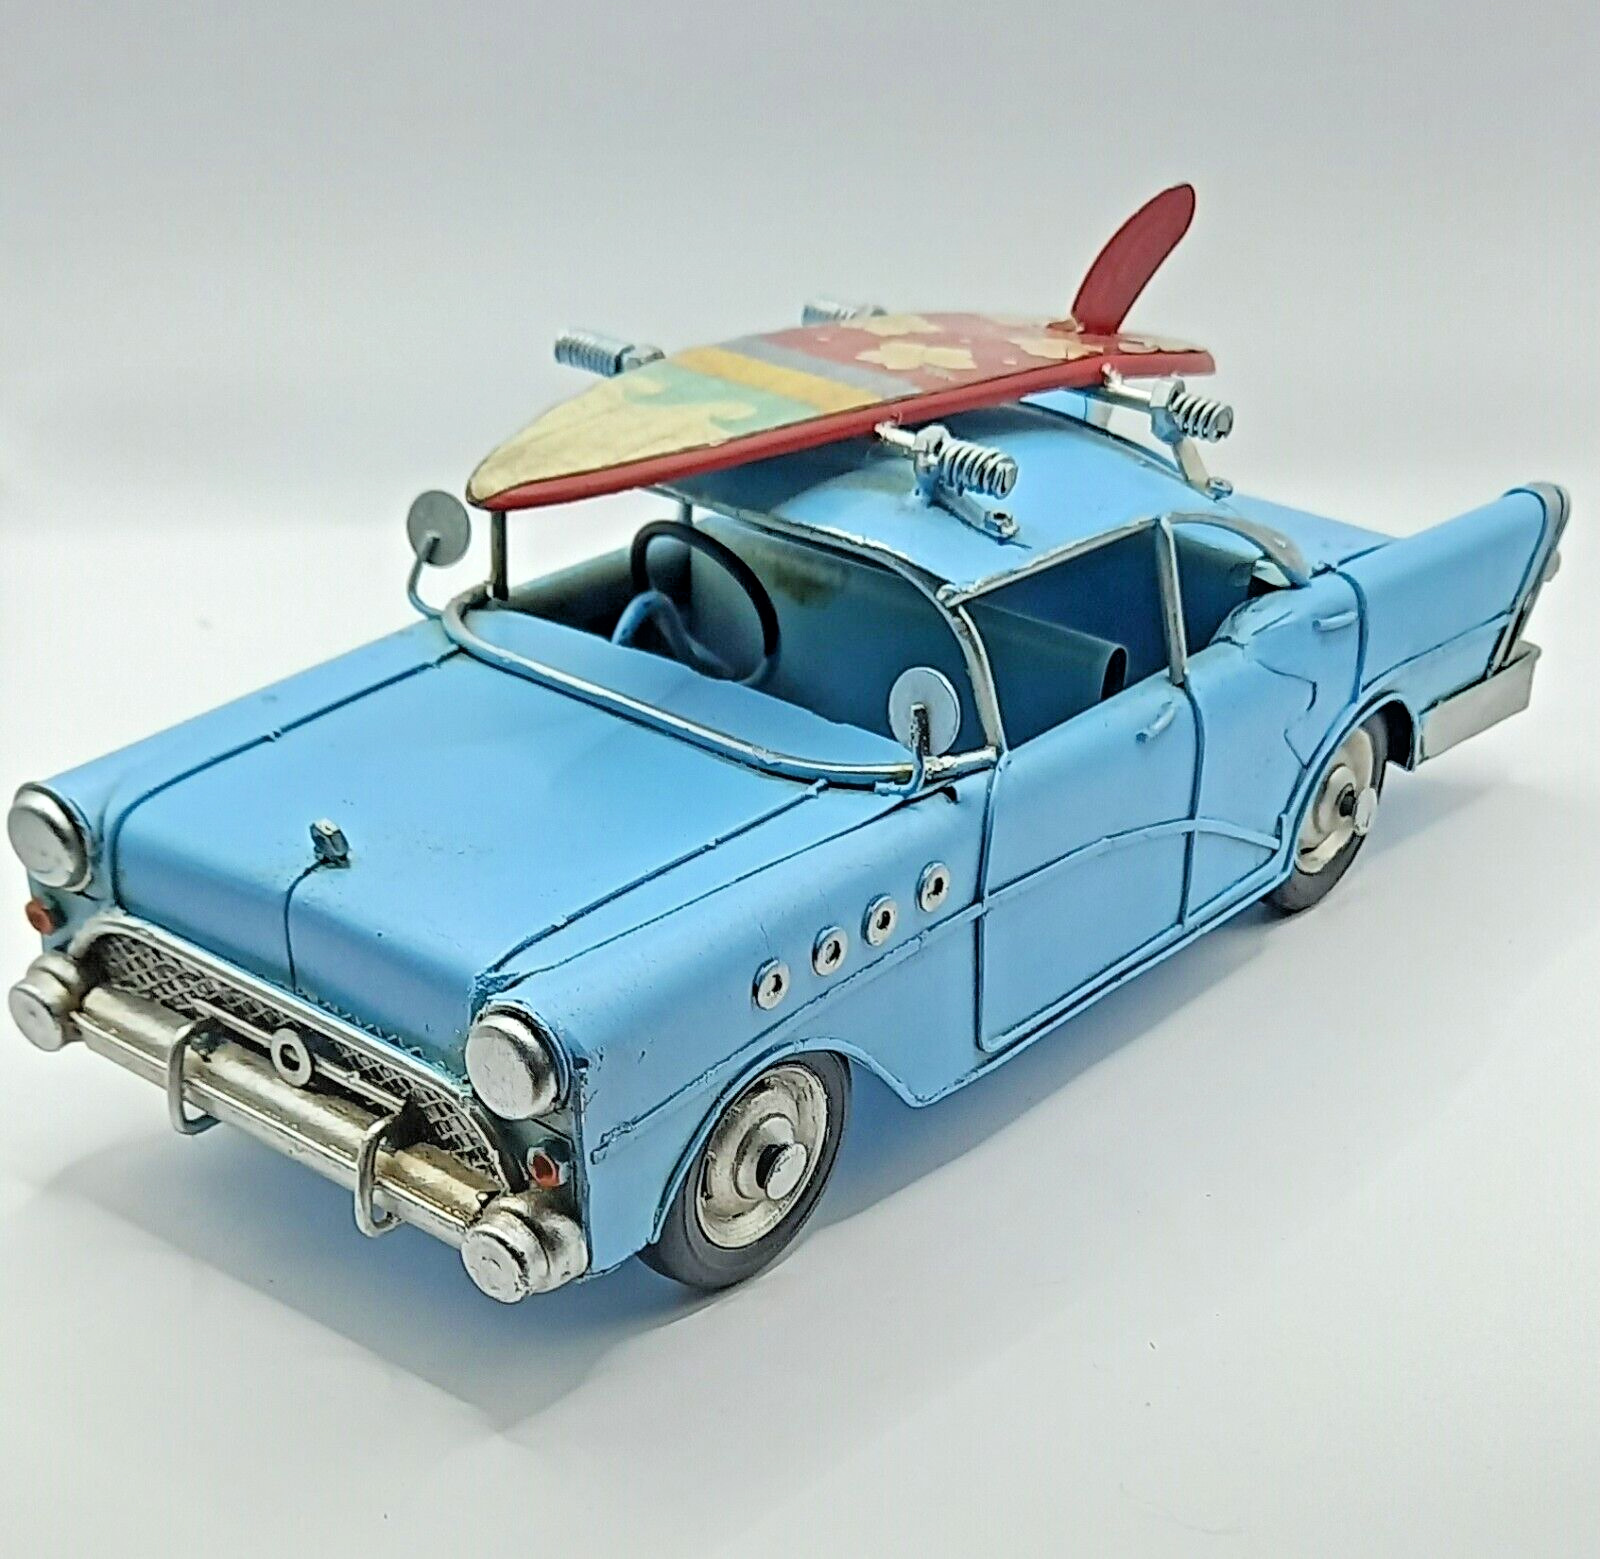 MODEL AMERICAN CAR WITH SURF BOARD RETRO VINTAGE CAR LARGE TINPLATE DECORATION